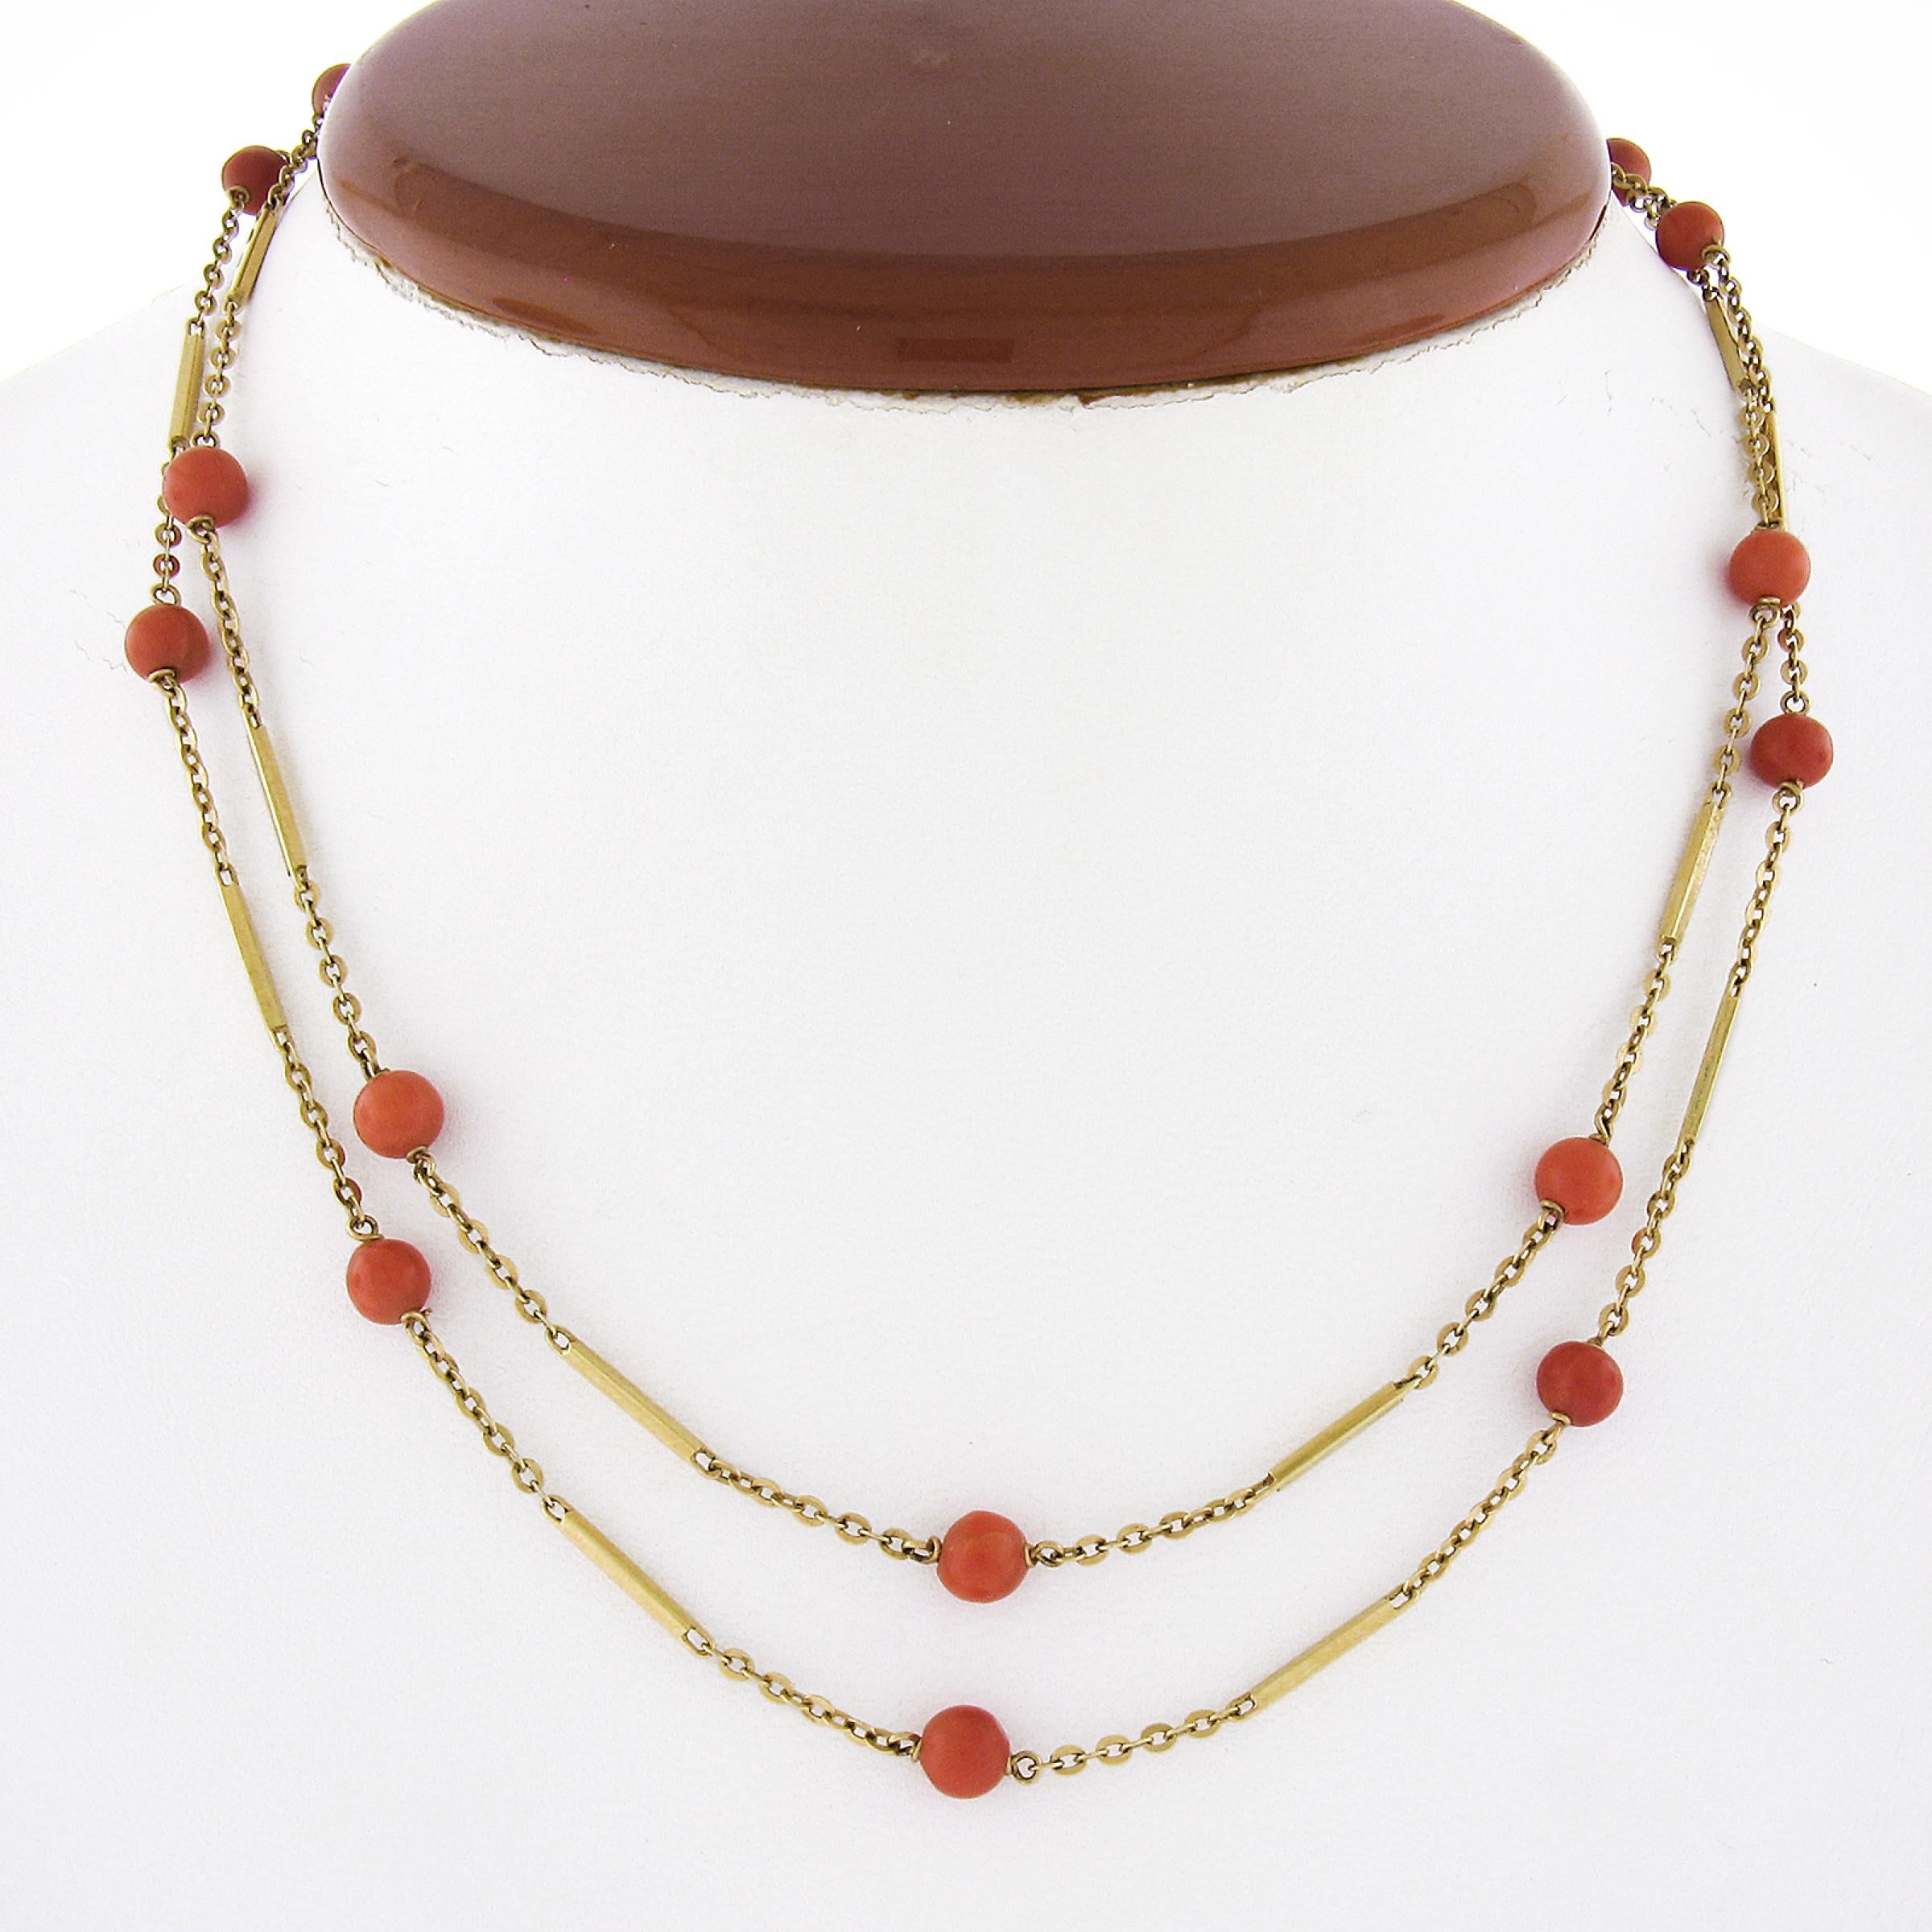 --Stone(s):--
(18) Natural Genuine Corals - Round Bead Shaped - Strung - Deep Orange Color - 5.1mm each (approx.)

Material: Solid 18k Yellow Gold
Weight: 10.33 Grams
Chain Type: Coral Bead Alternated with Bar & Cable Link Sections 
Length: 30